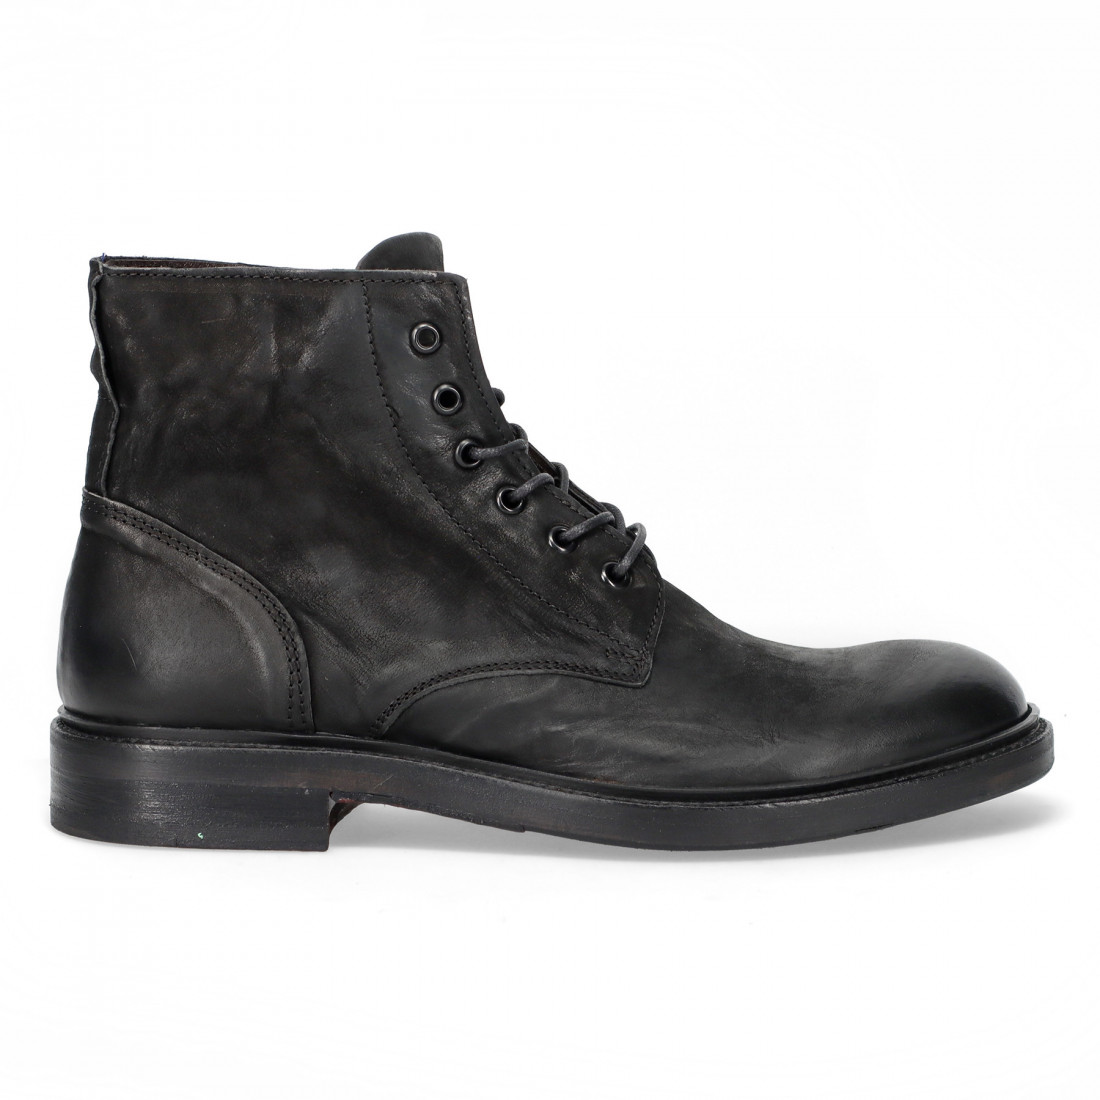 Pawelk's men's black ankle boot in oiled leather